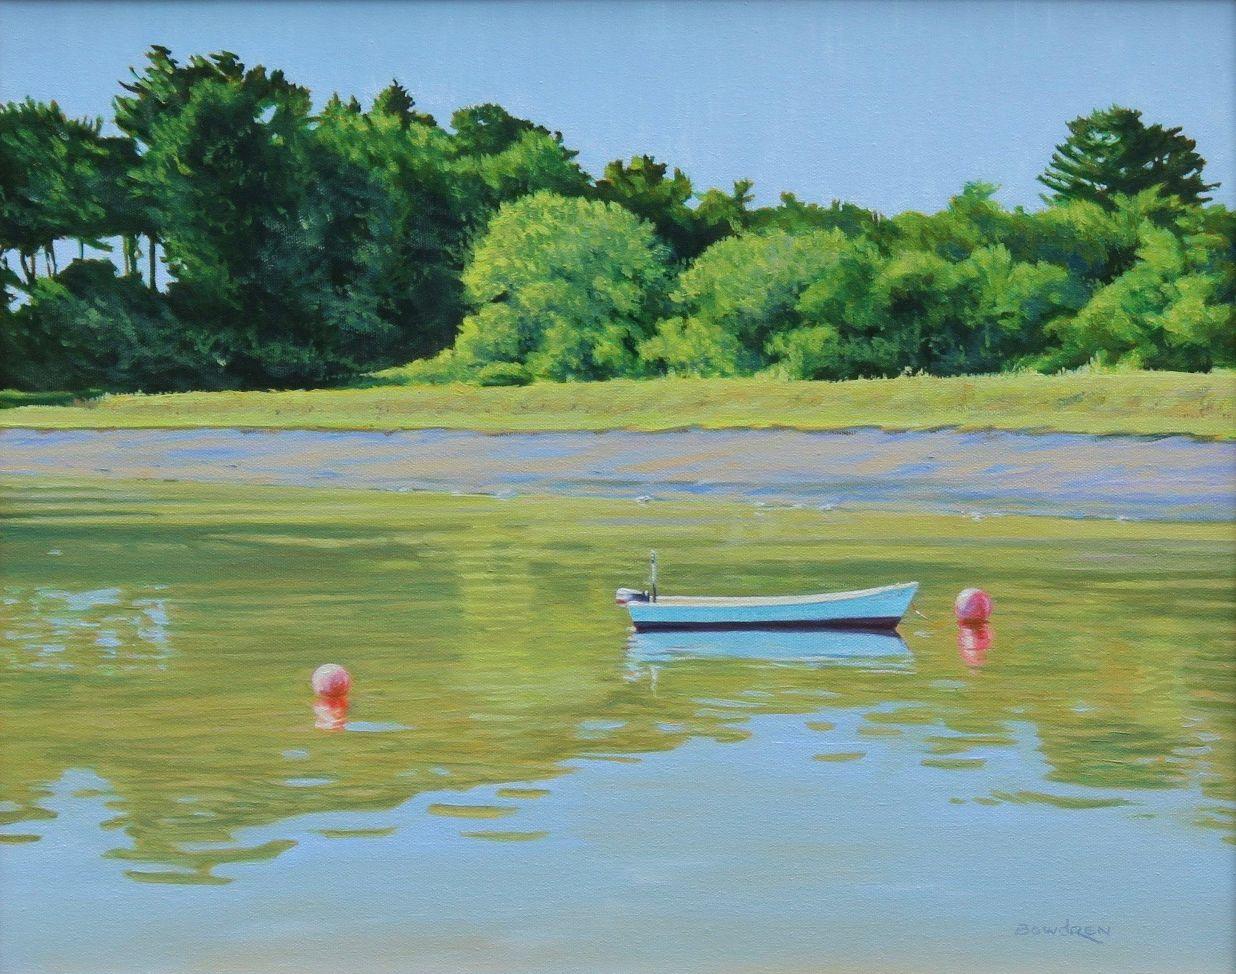 A boat at its mooring in the Royal River near where it meets Casco Bay in Maine. I was struck by the vividness of the scene in the midday sun and the reflections in the water. :: Painting :: Realism :: This piece comes with an official certificate